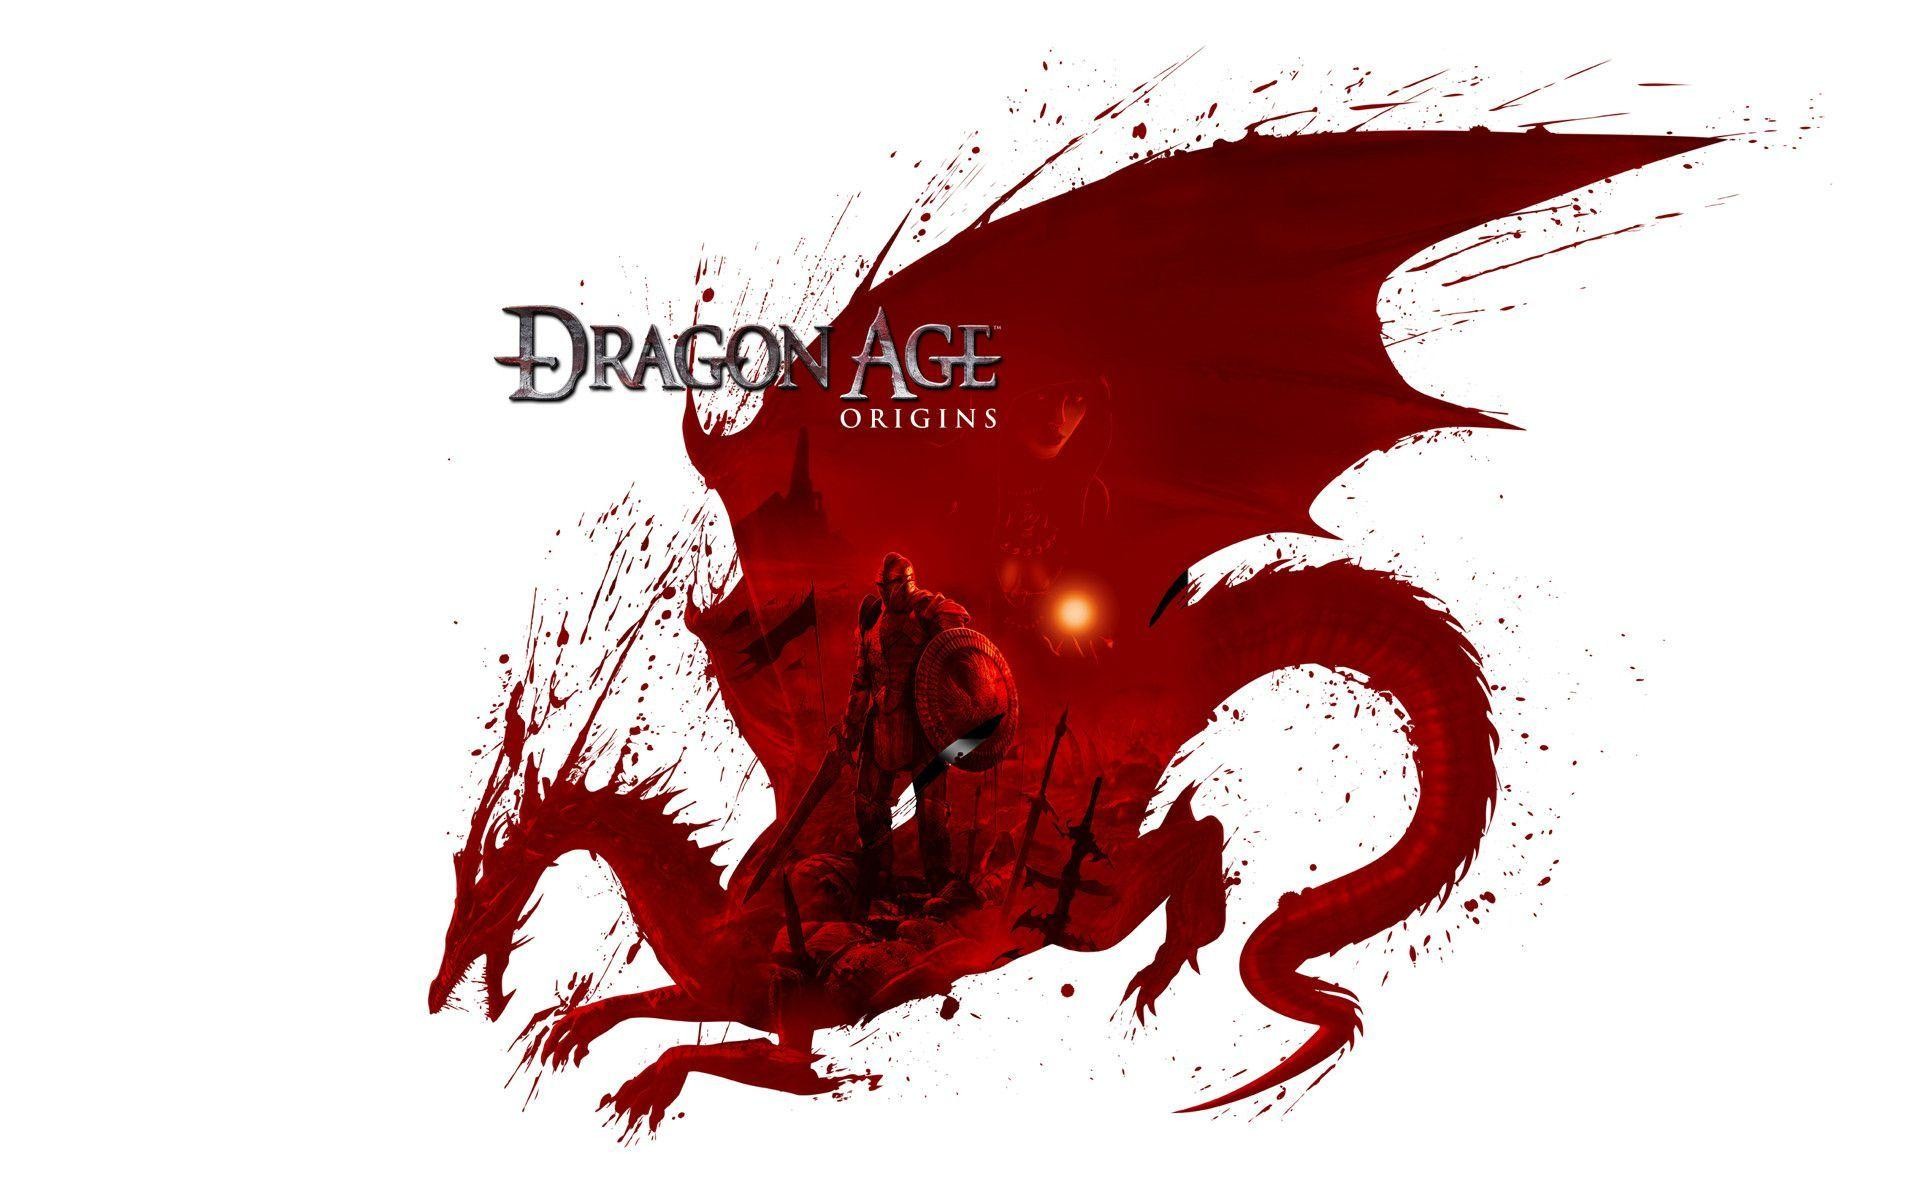 Dragon Age II Wallpaper by suicidebyinsecticide on DeviantArt